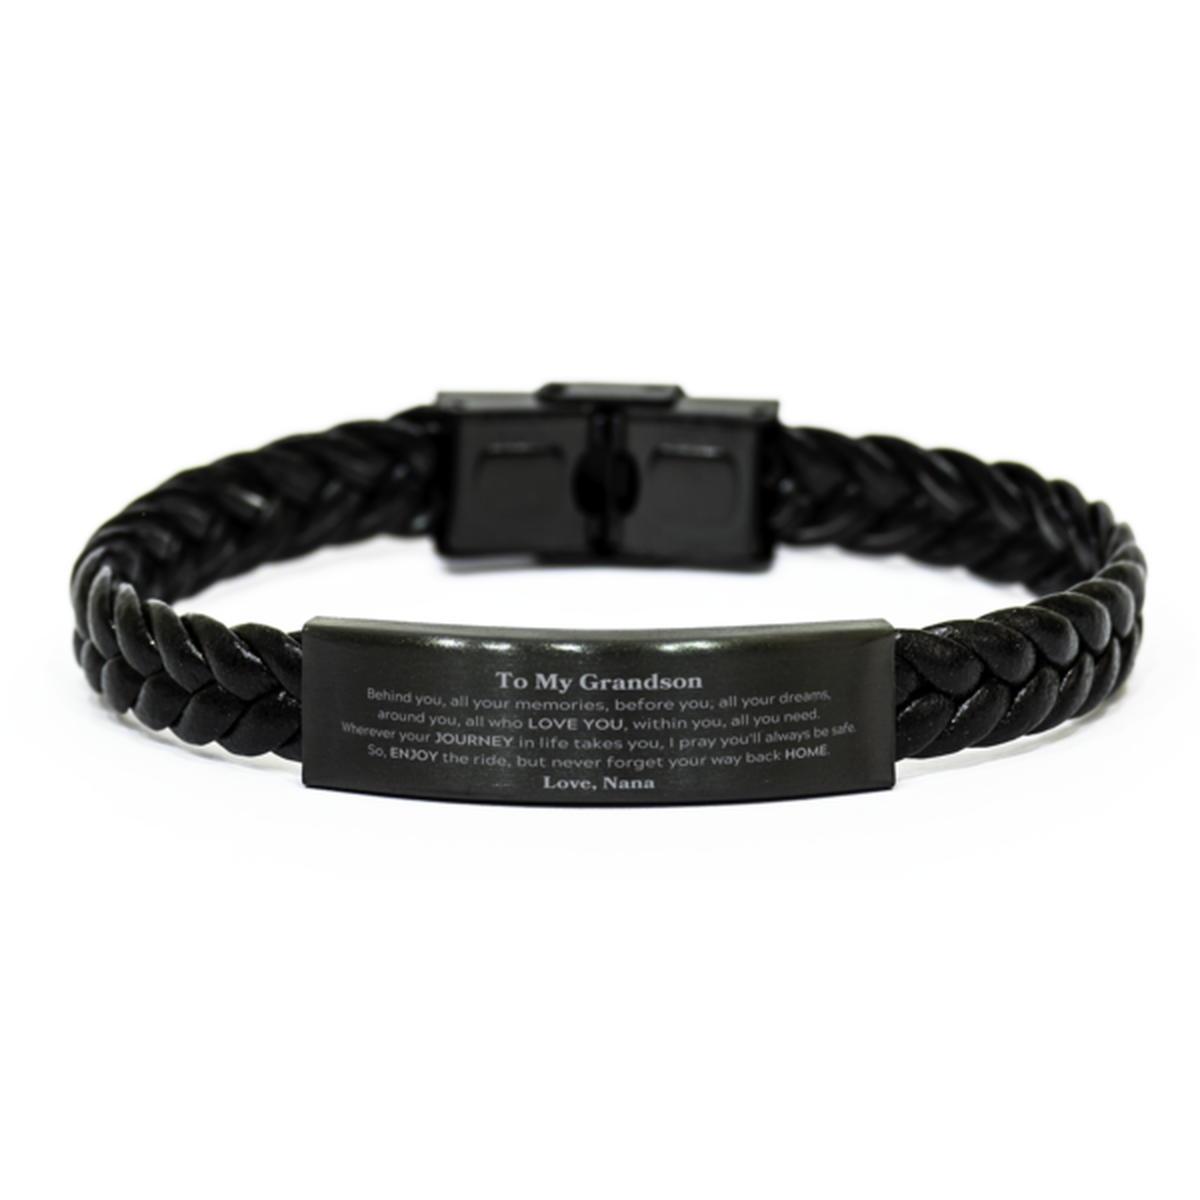 To My Grandson Graduation Gifts from Nana, Grandson Braided Leather Bracelet Christmas Birthday Gifts for Grandson Behind you, all your memories, before you, all your dreams. Love, Nana